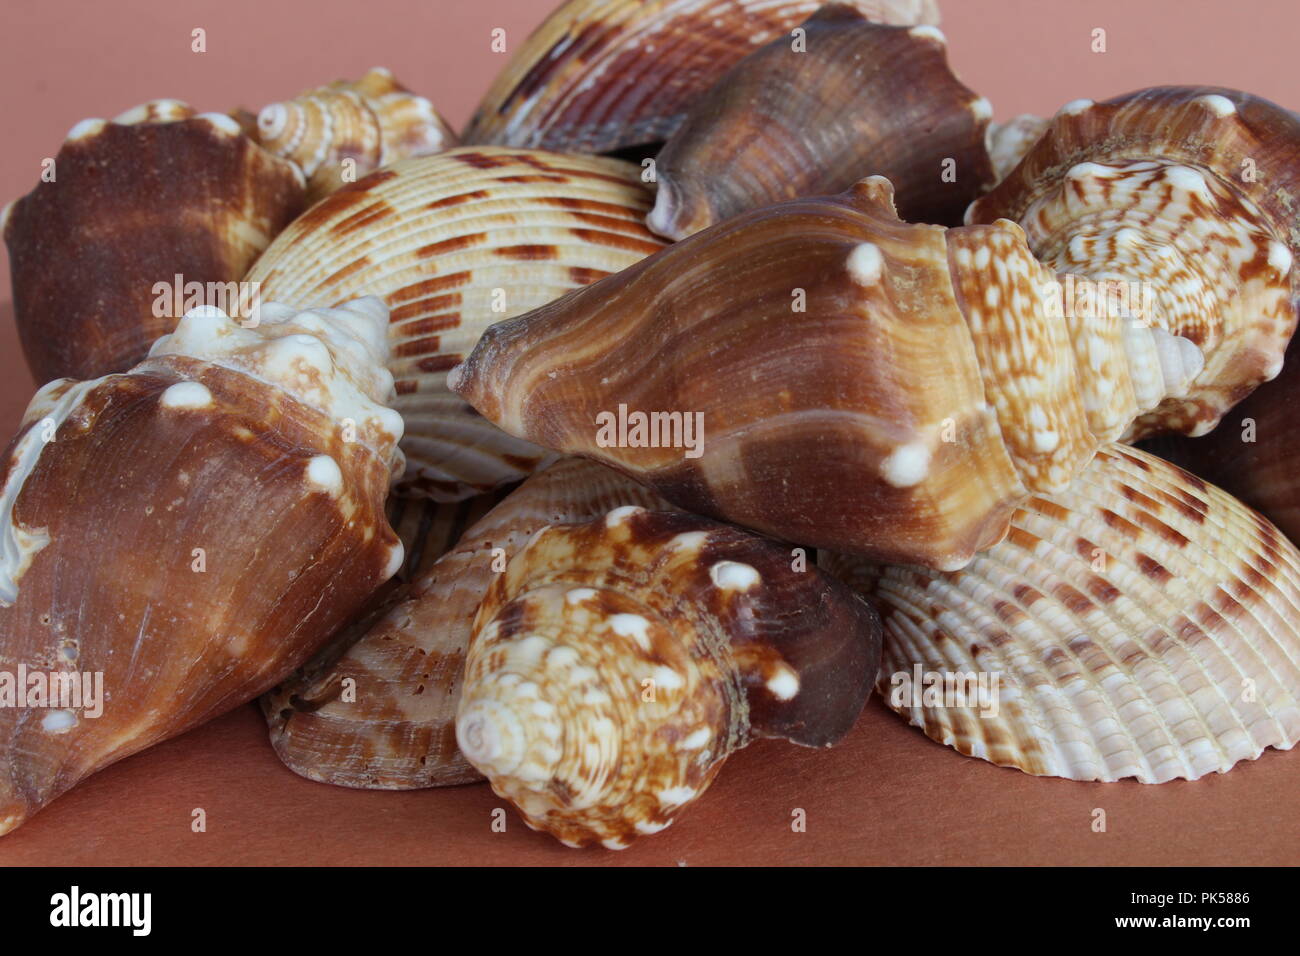 group of seashells on a brown background Stock Photo